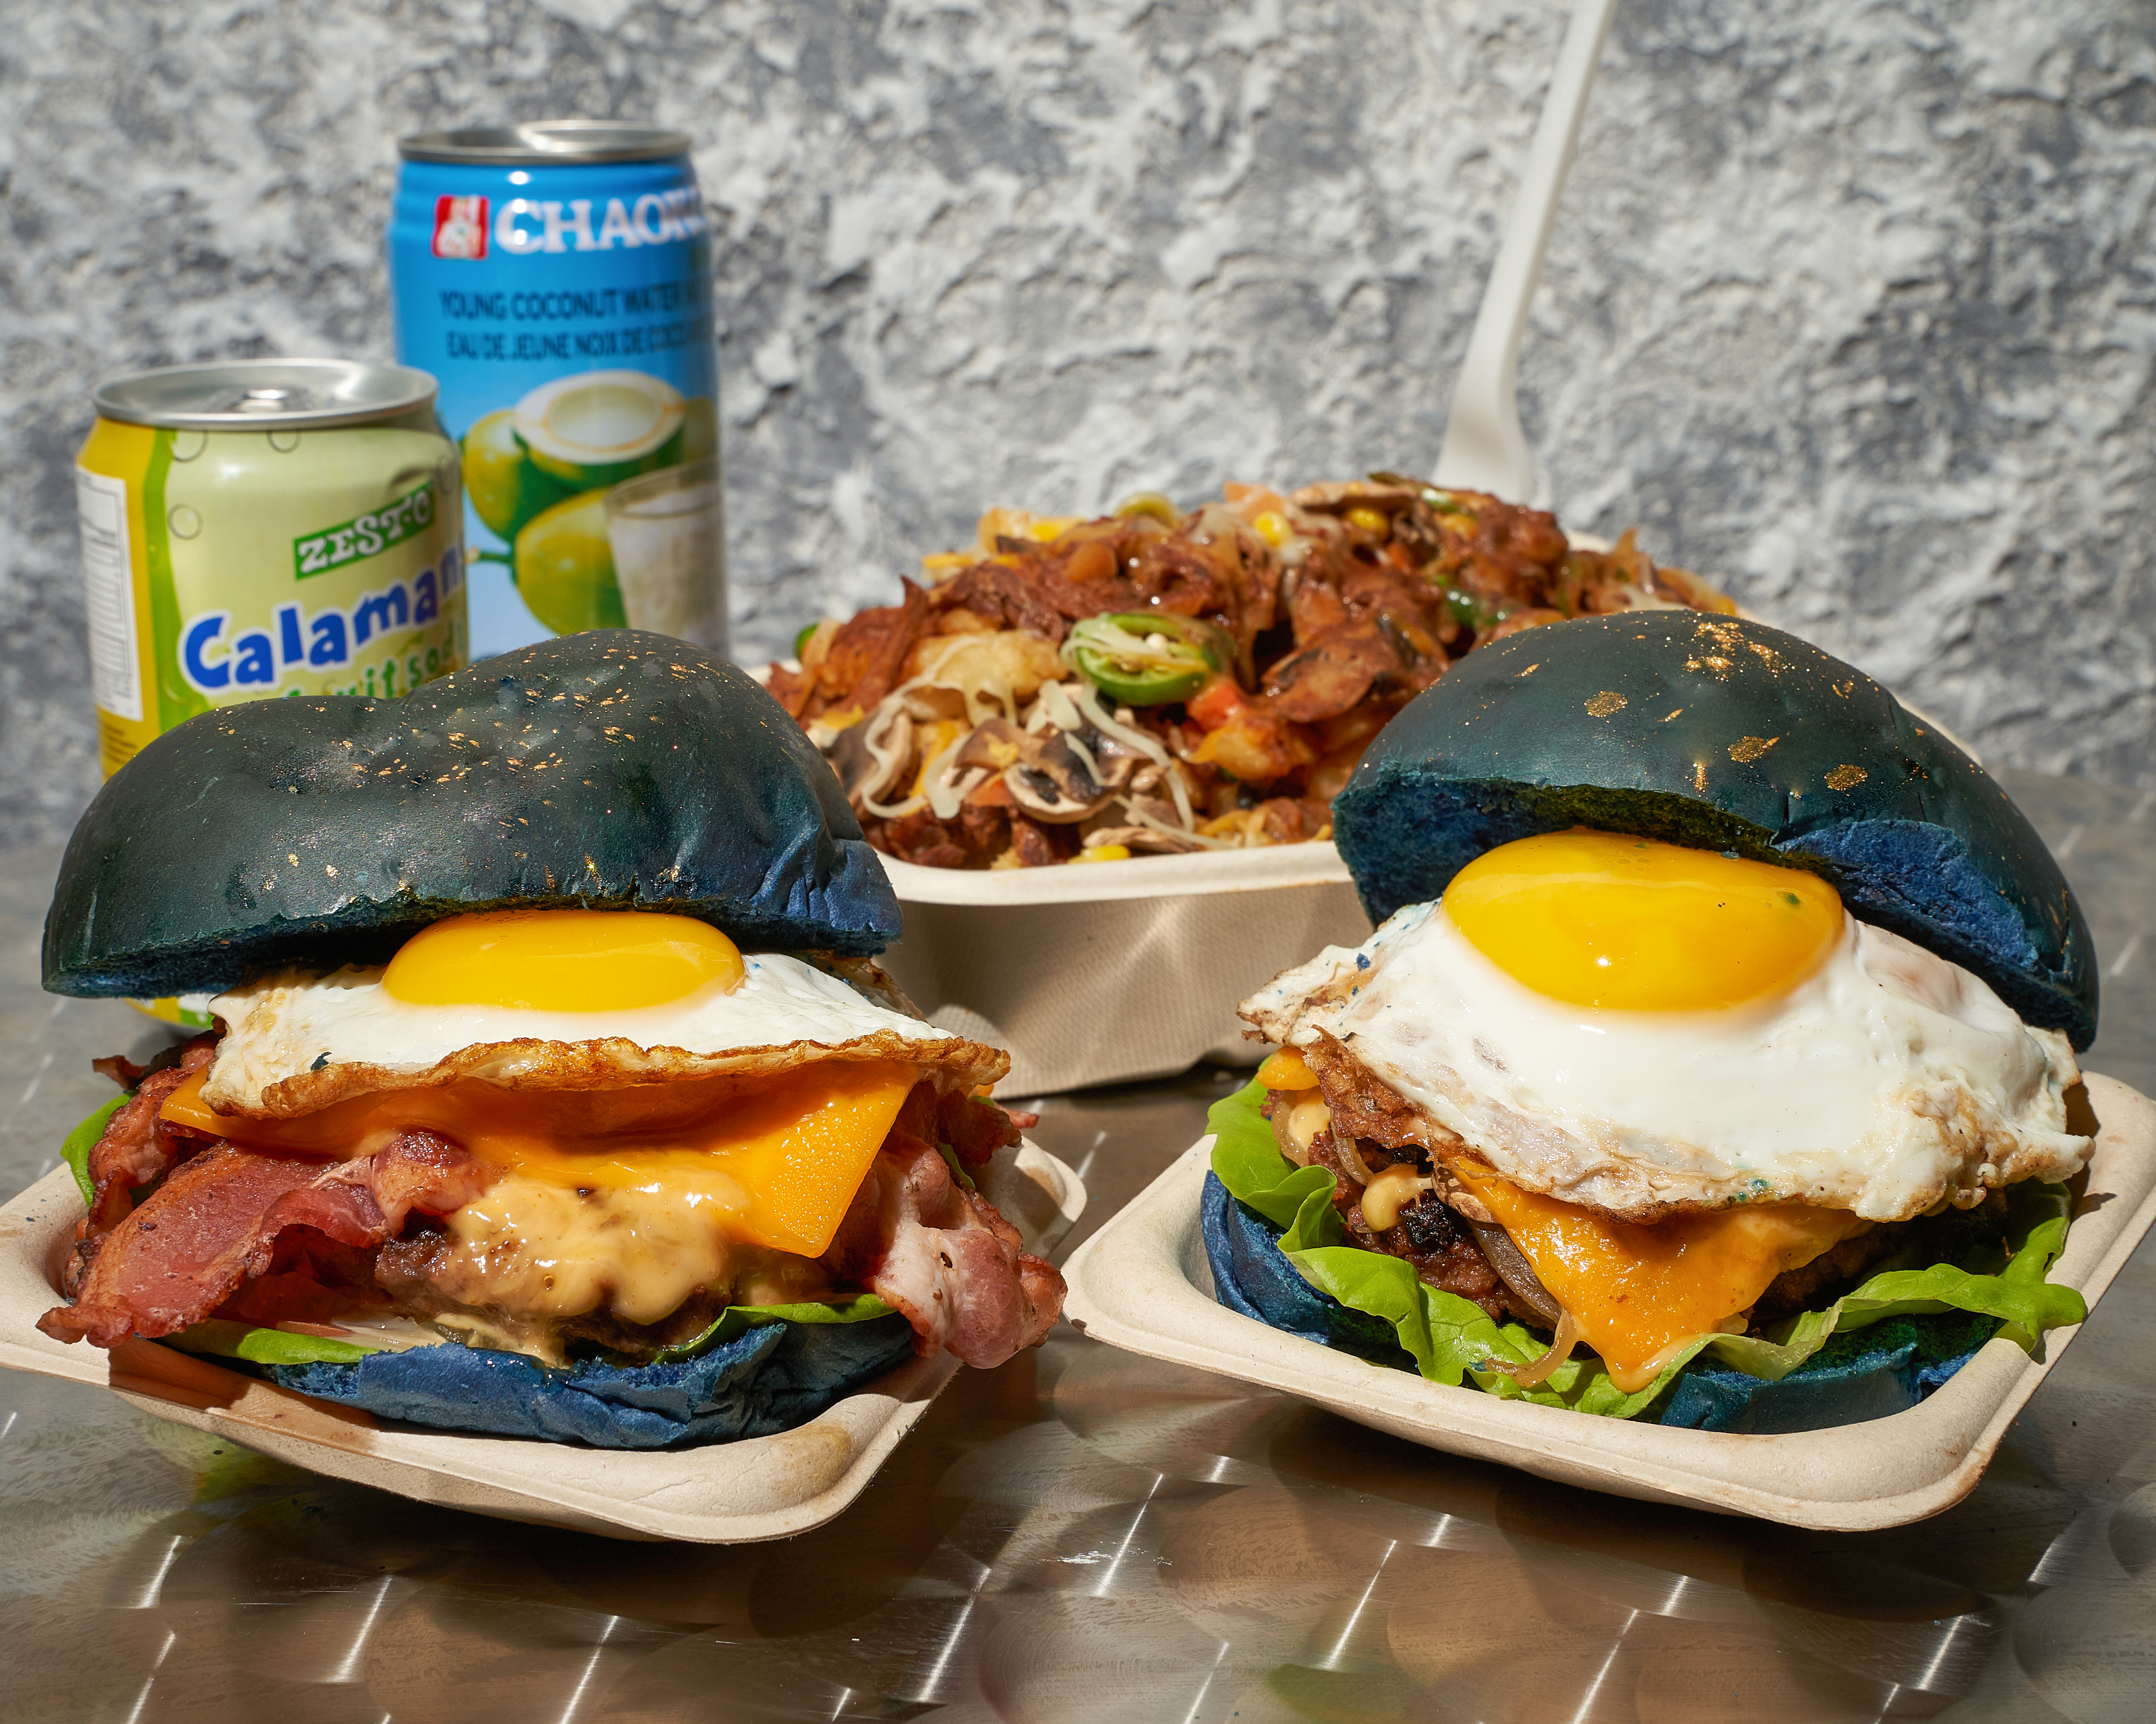 Two Hungry Moon burgers with eggs